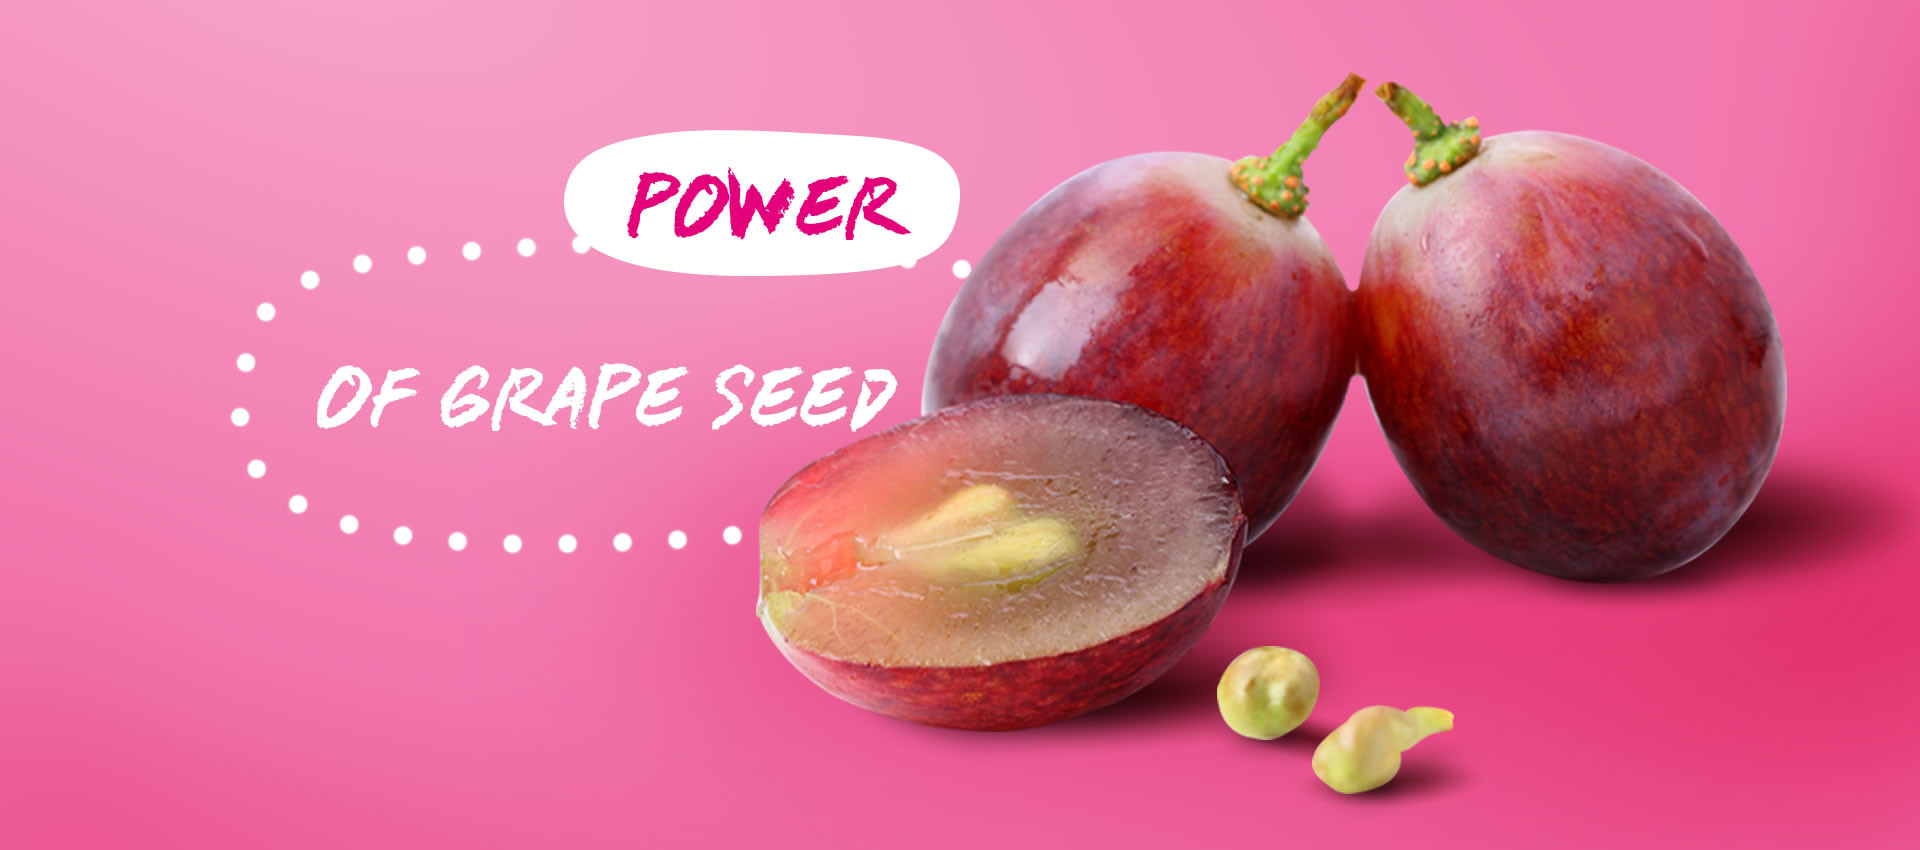 The power of grape seed